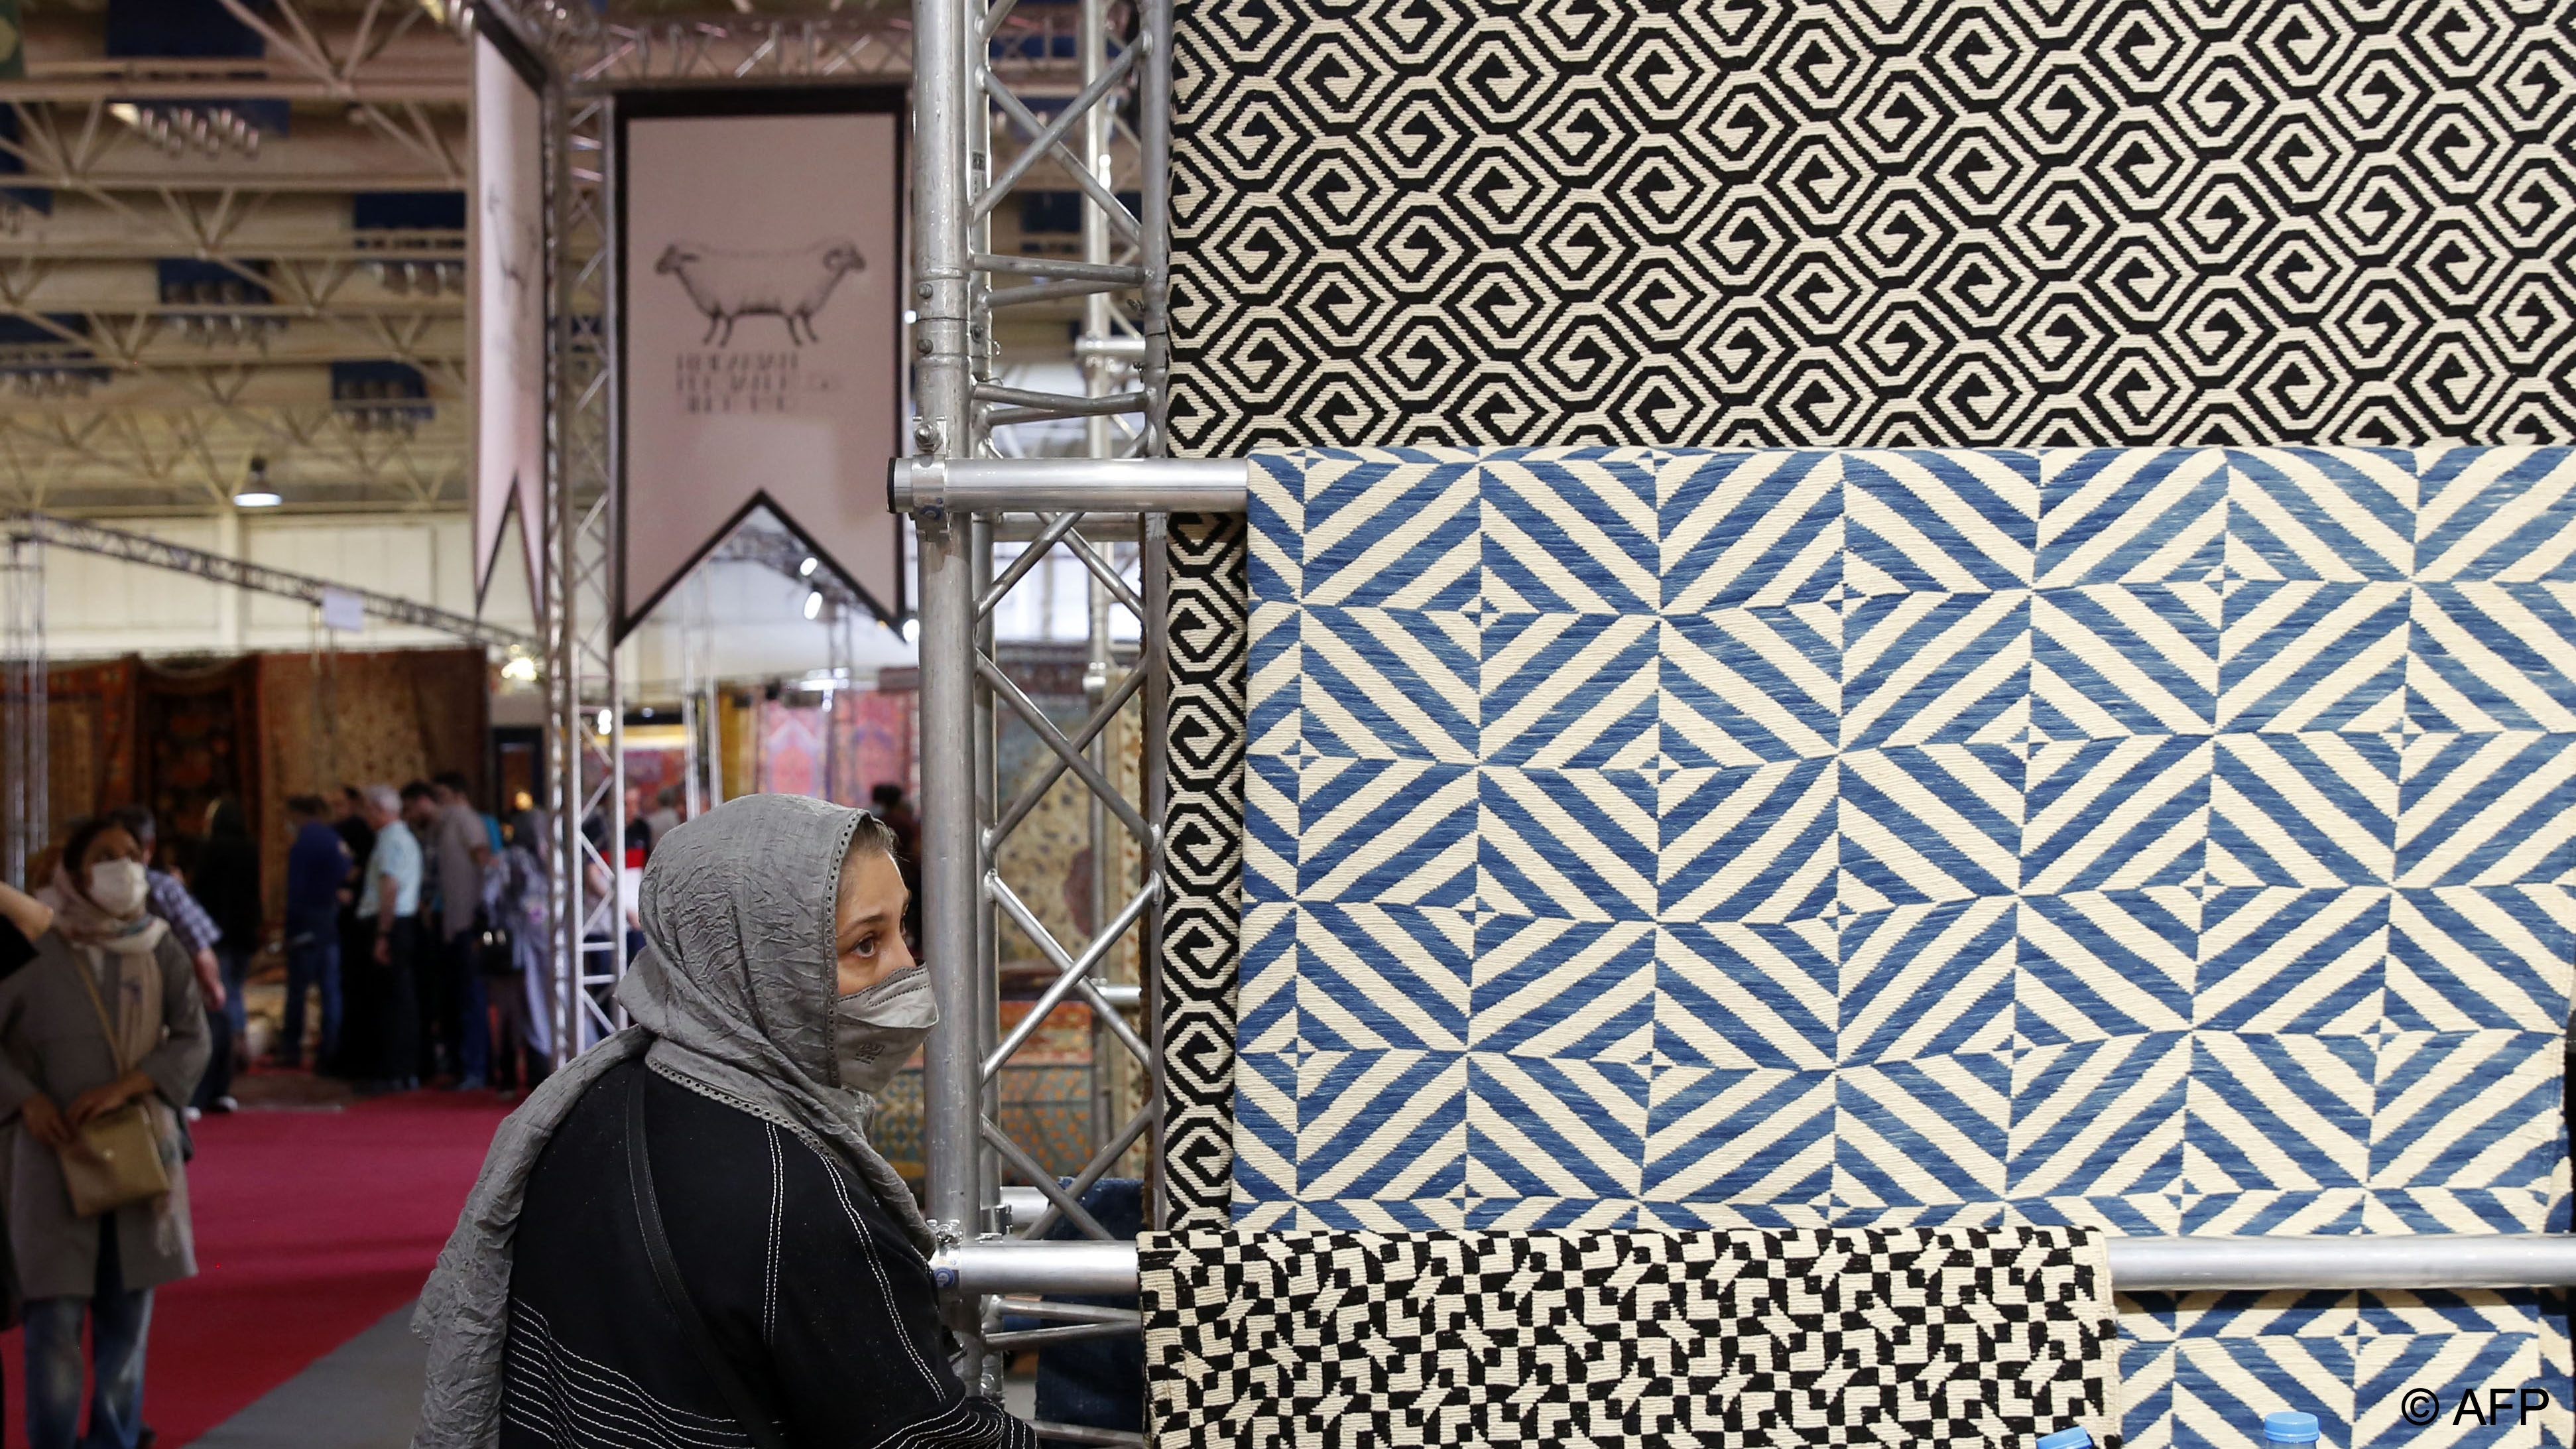 Geometric shapes have started to appear on Iranian carpets as part of a redesign and resizing in response to changing tastes, and fallen exports.